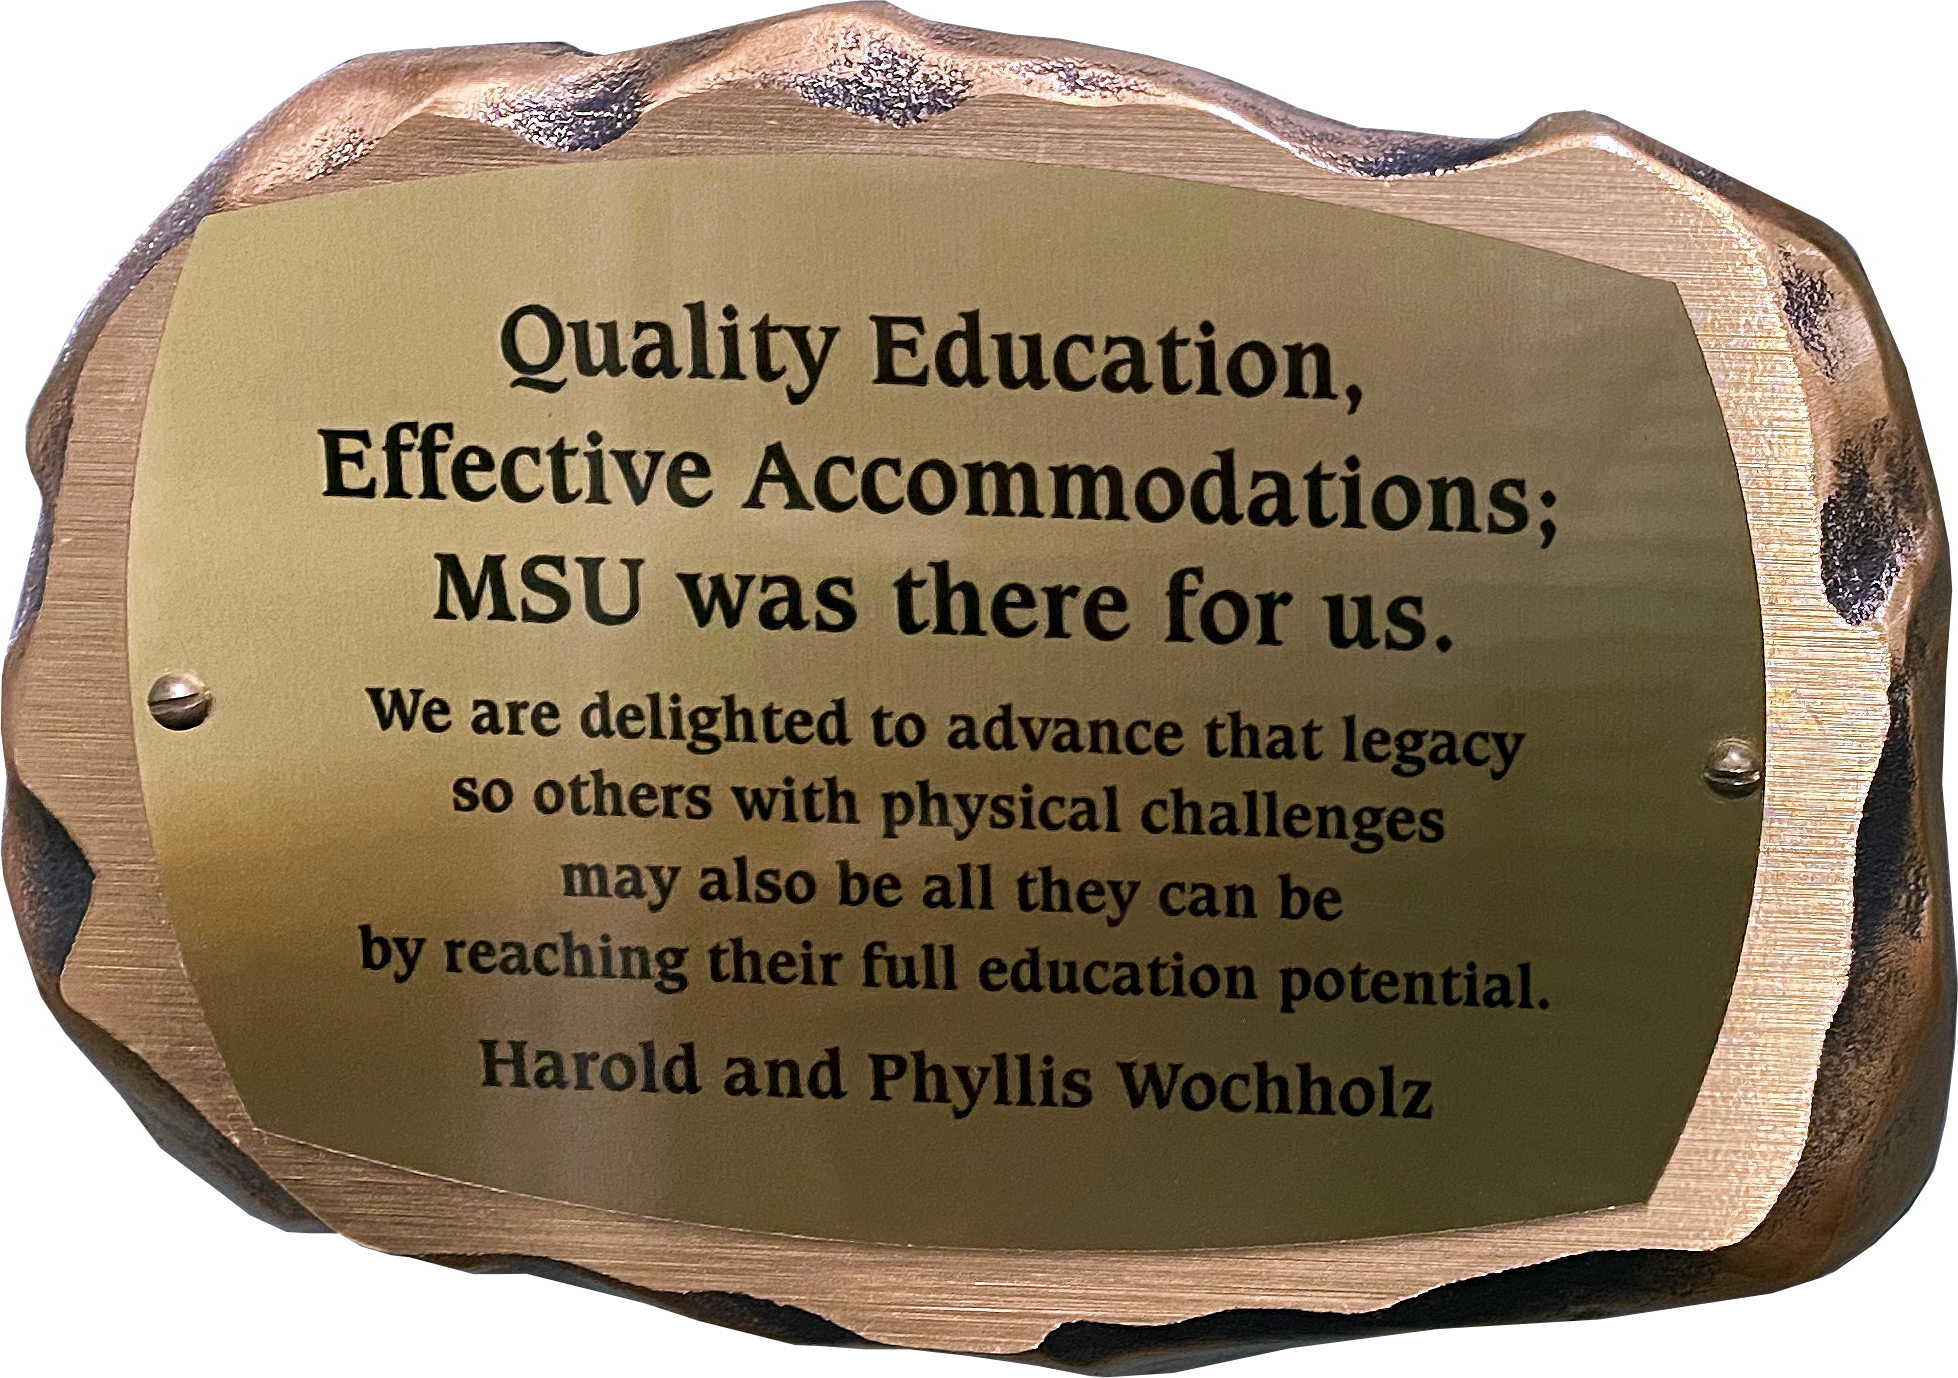 Inscribed bronze plaque in the shape of a rock with text on it reading: "Quality Education, Effective Accommodations; MSU was there for us. We are delighted to advance that legacy so others with physical challenges may also be all they can be by reaching their full potential. Harold and Phyllis Wochholz"